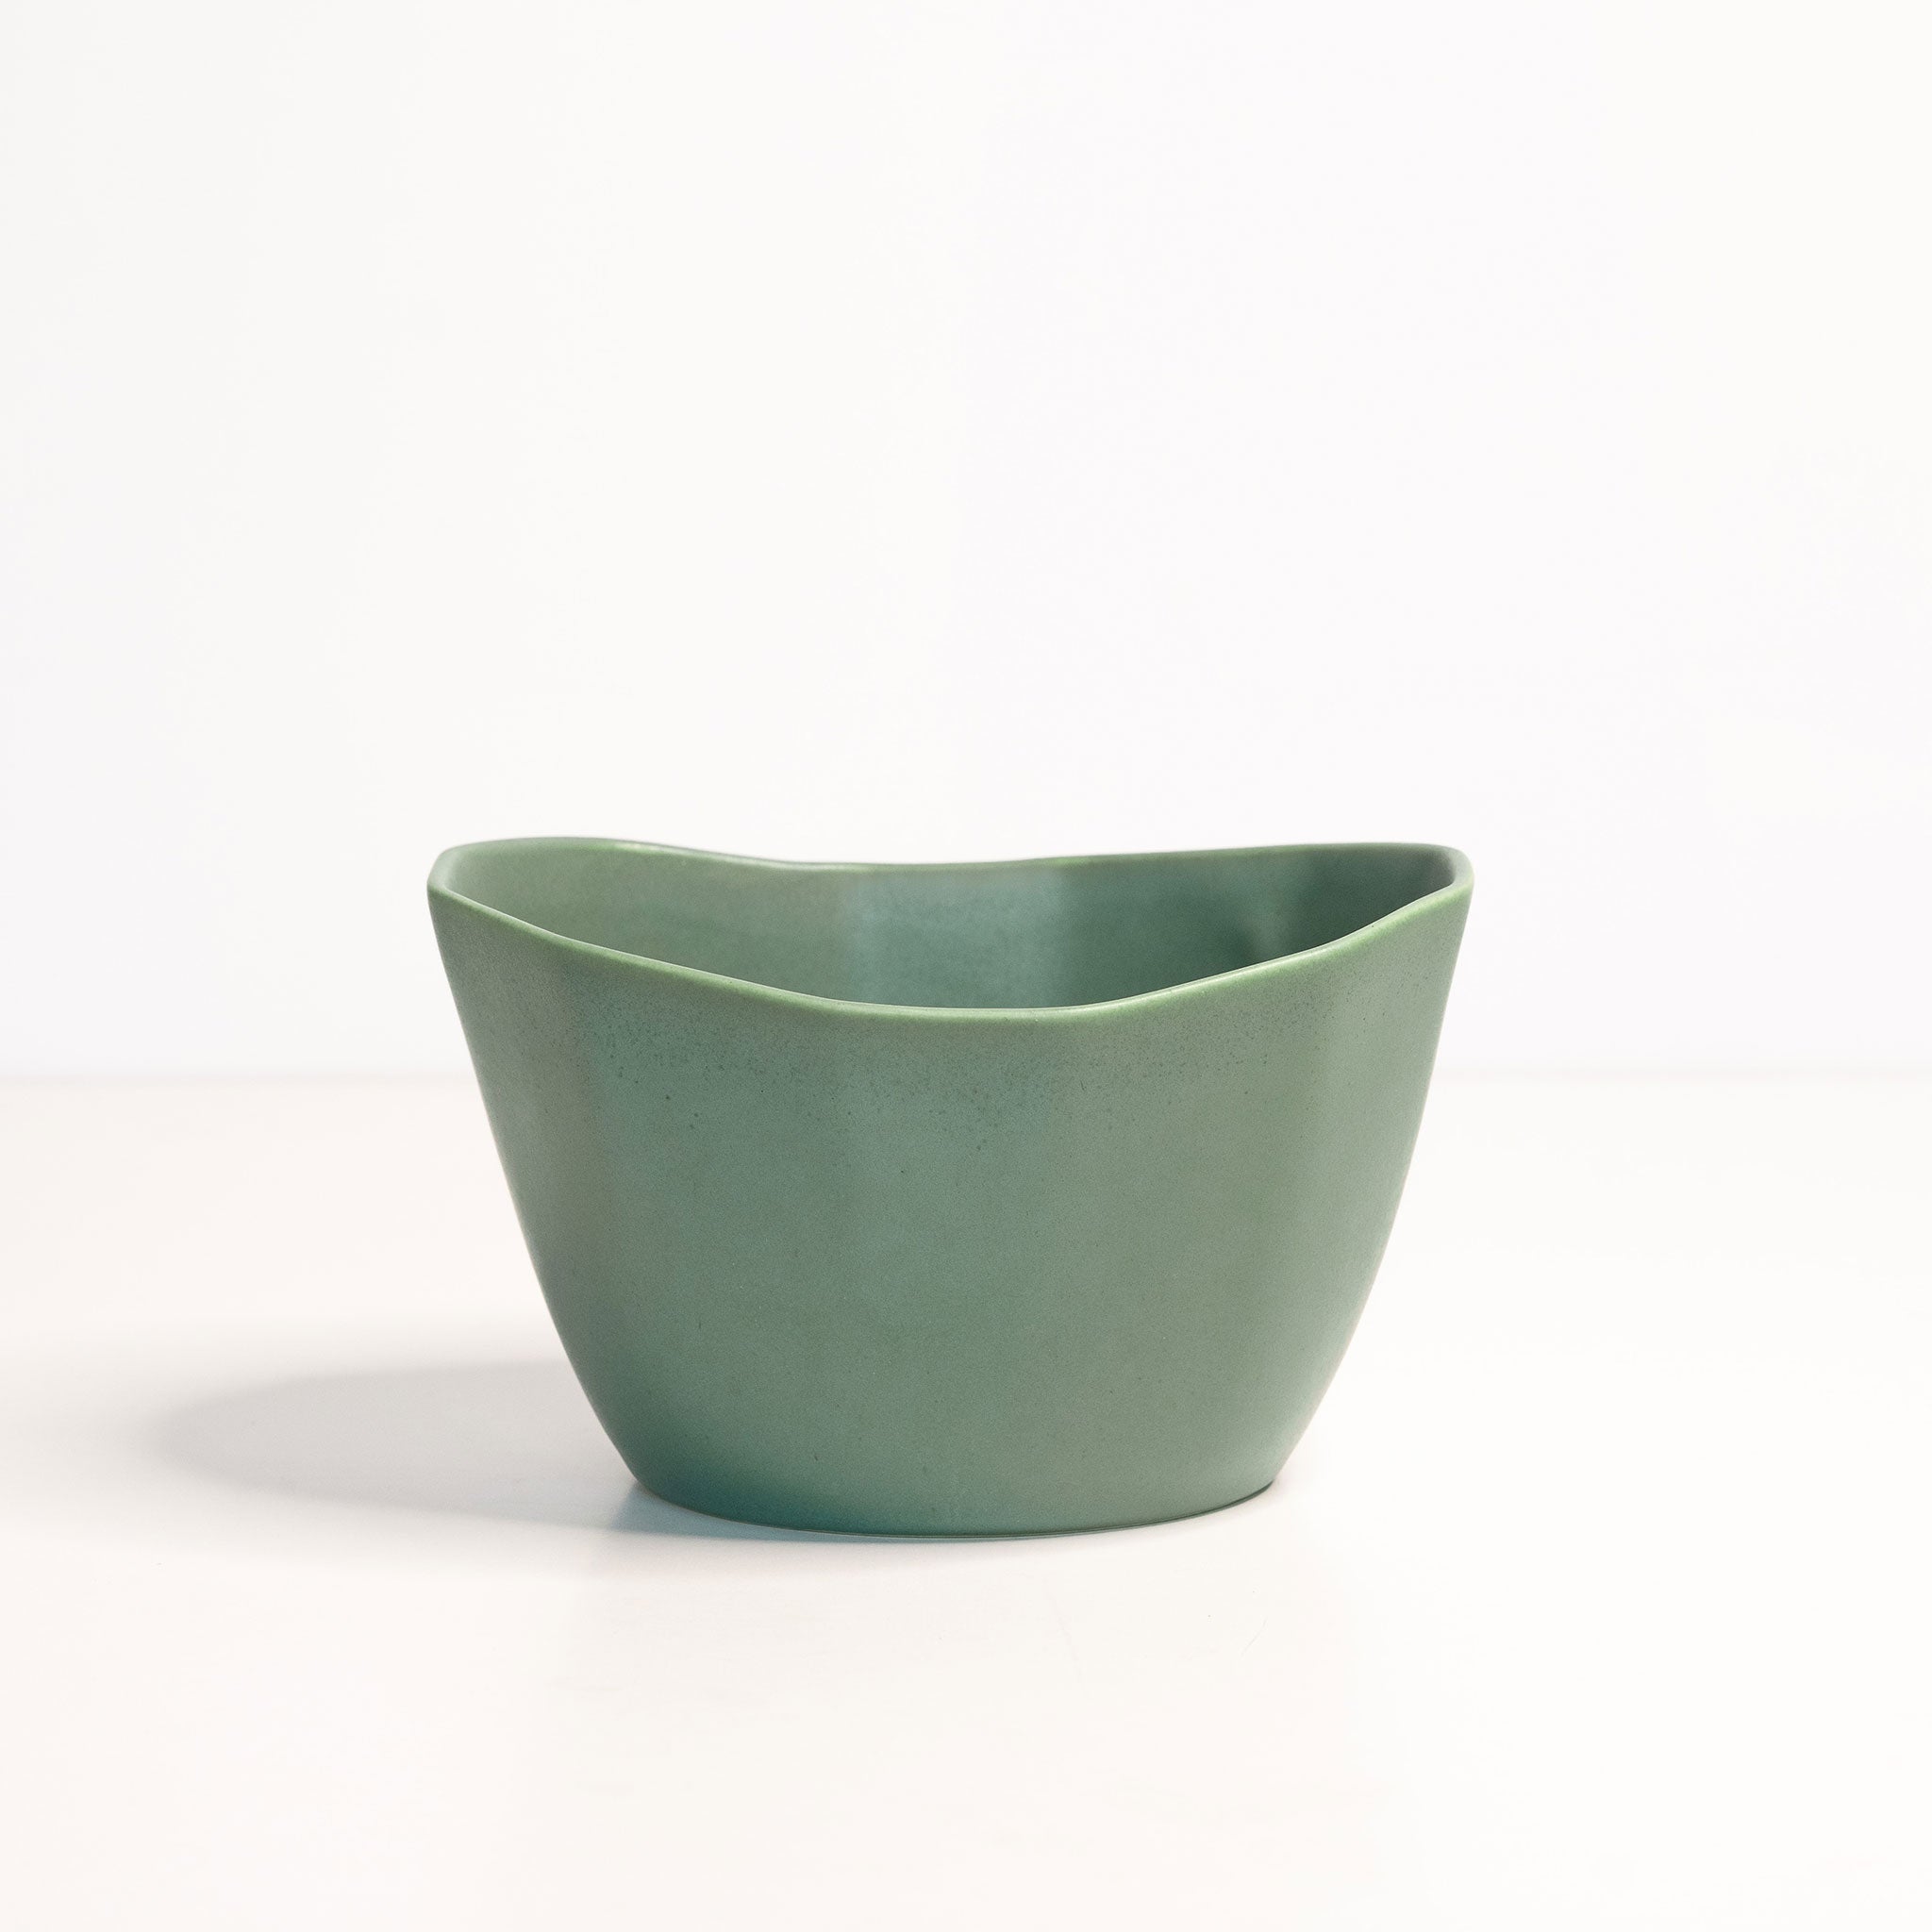 Small Porcelain Nesting Bowl Rosemary Green The Bright Angle